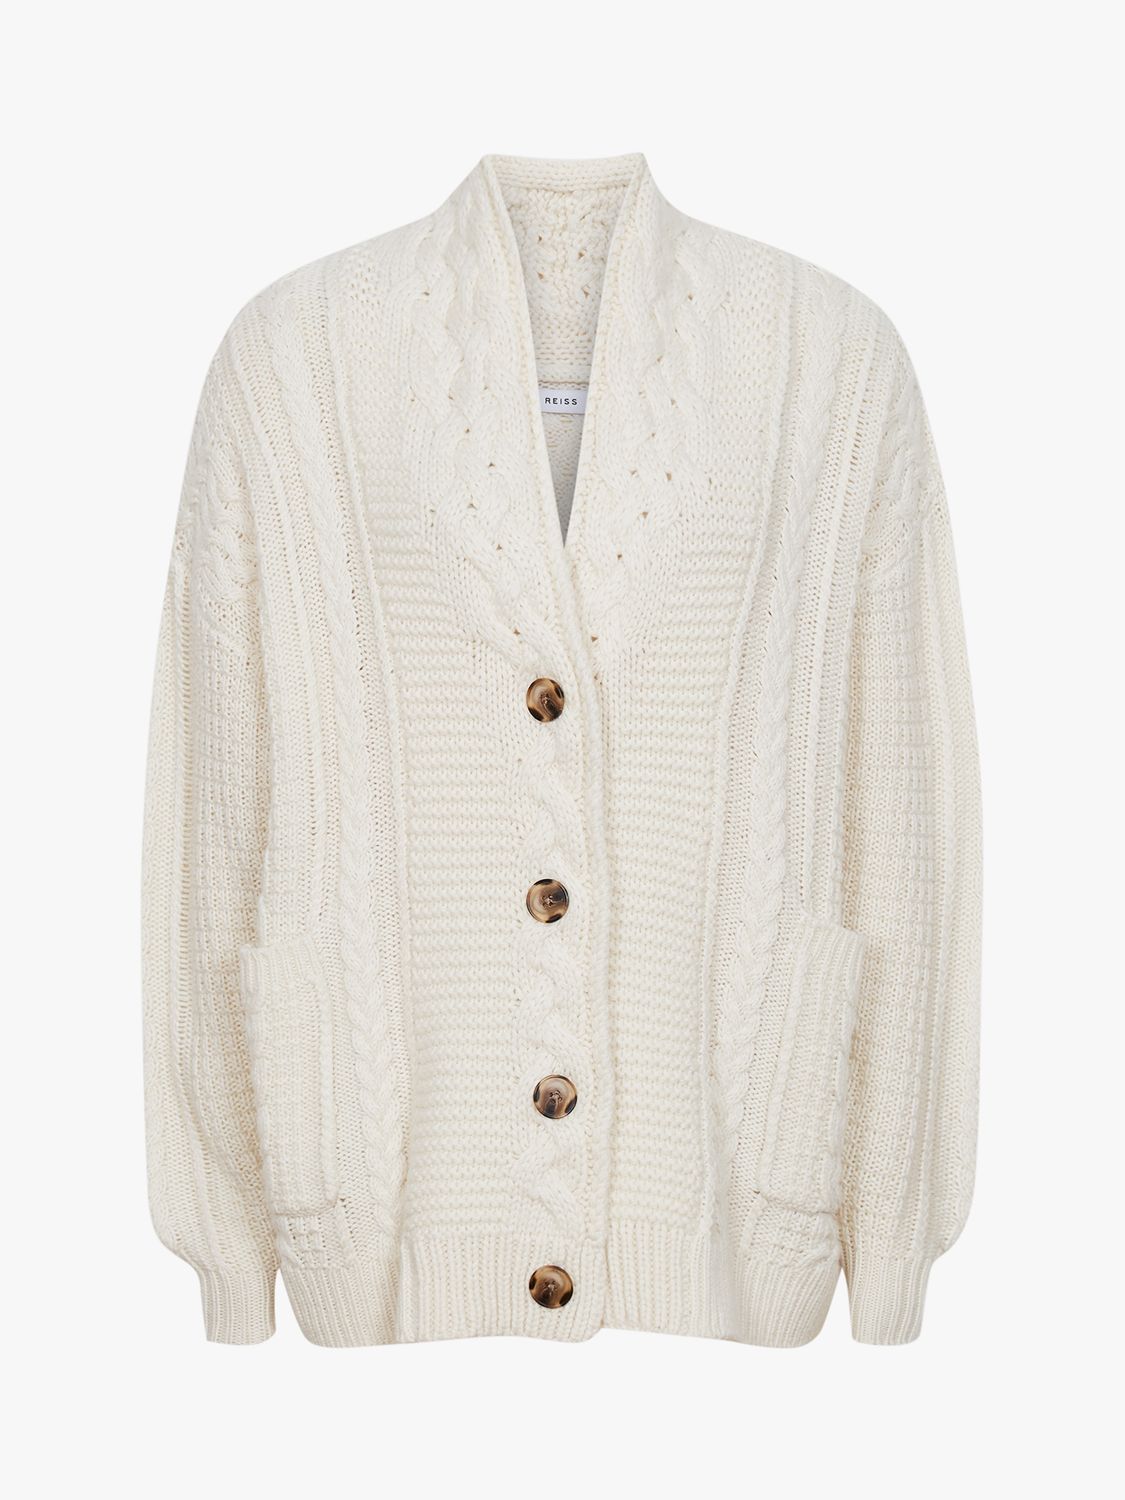 Reiss Summer Chunky Cable Knit Button Cardigan, Cream at John Lewis ...